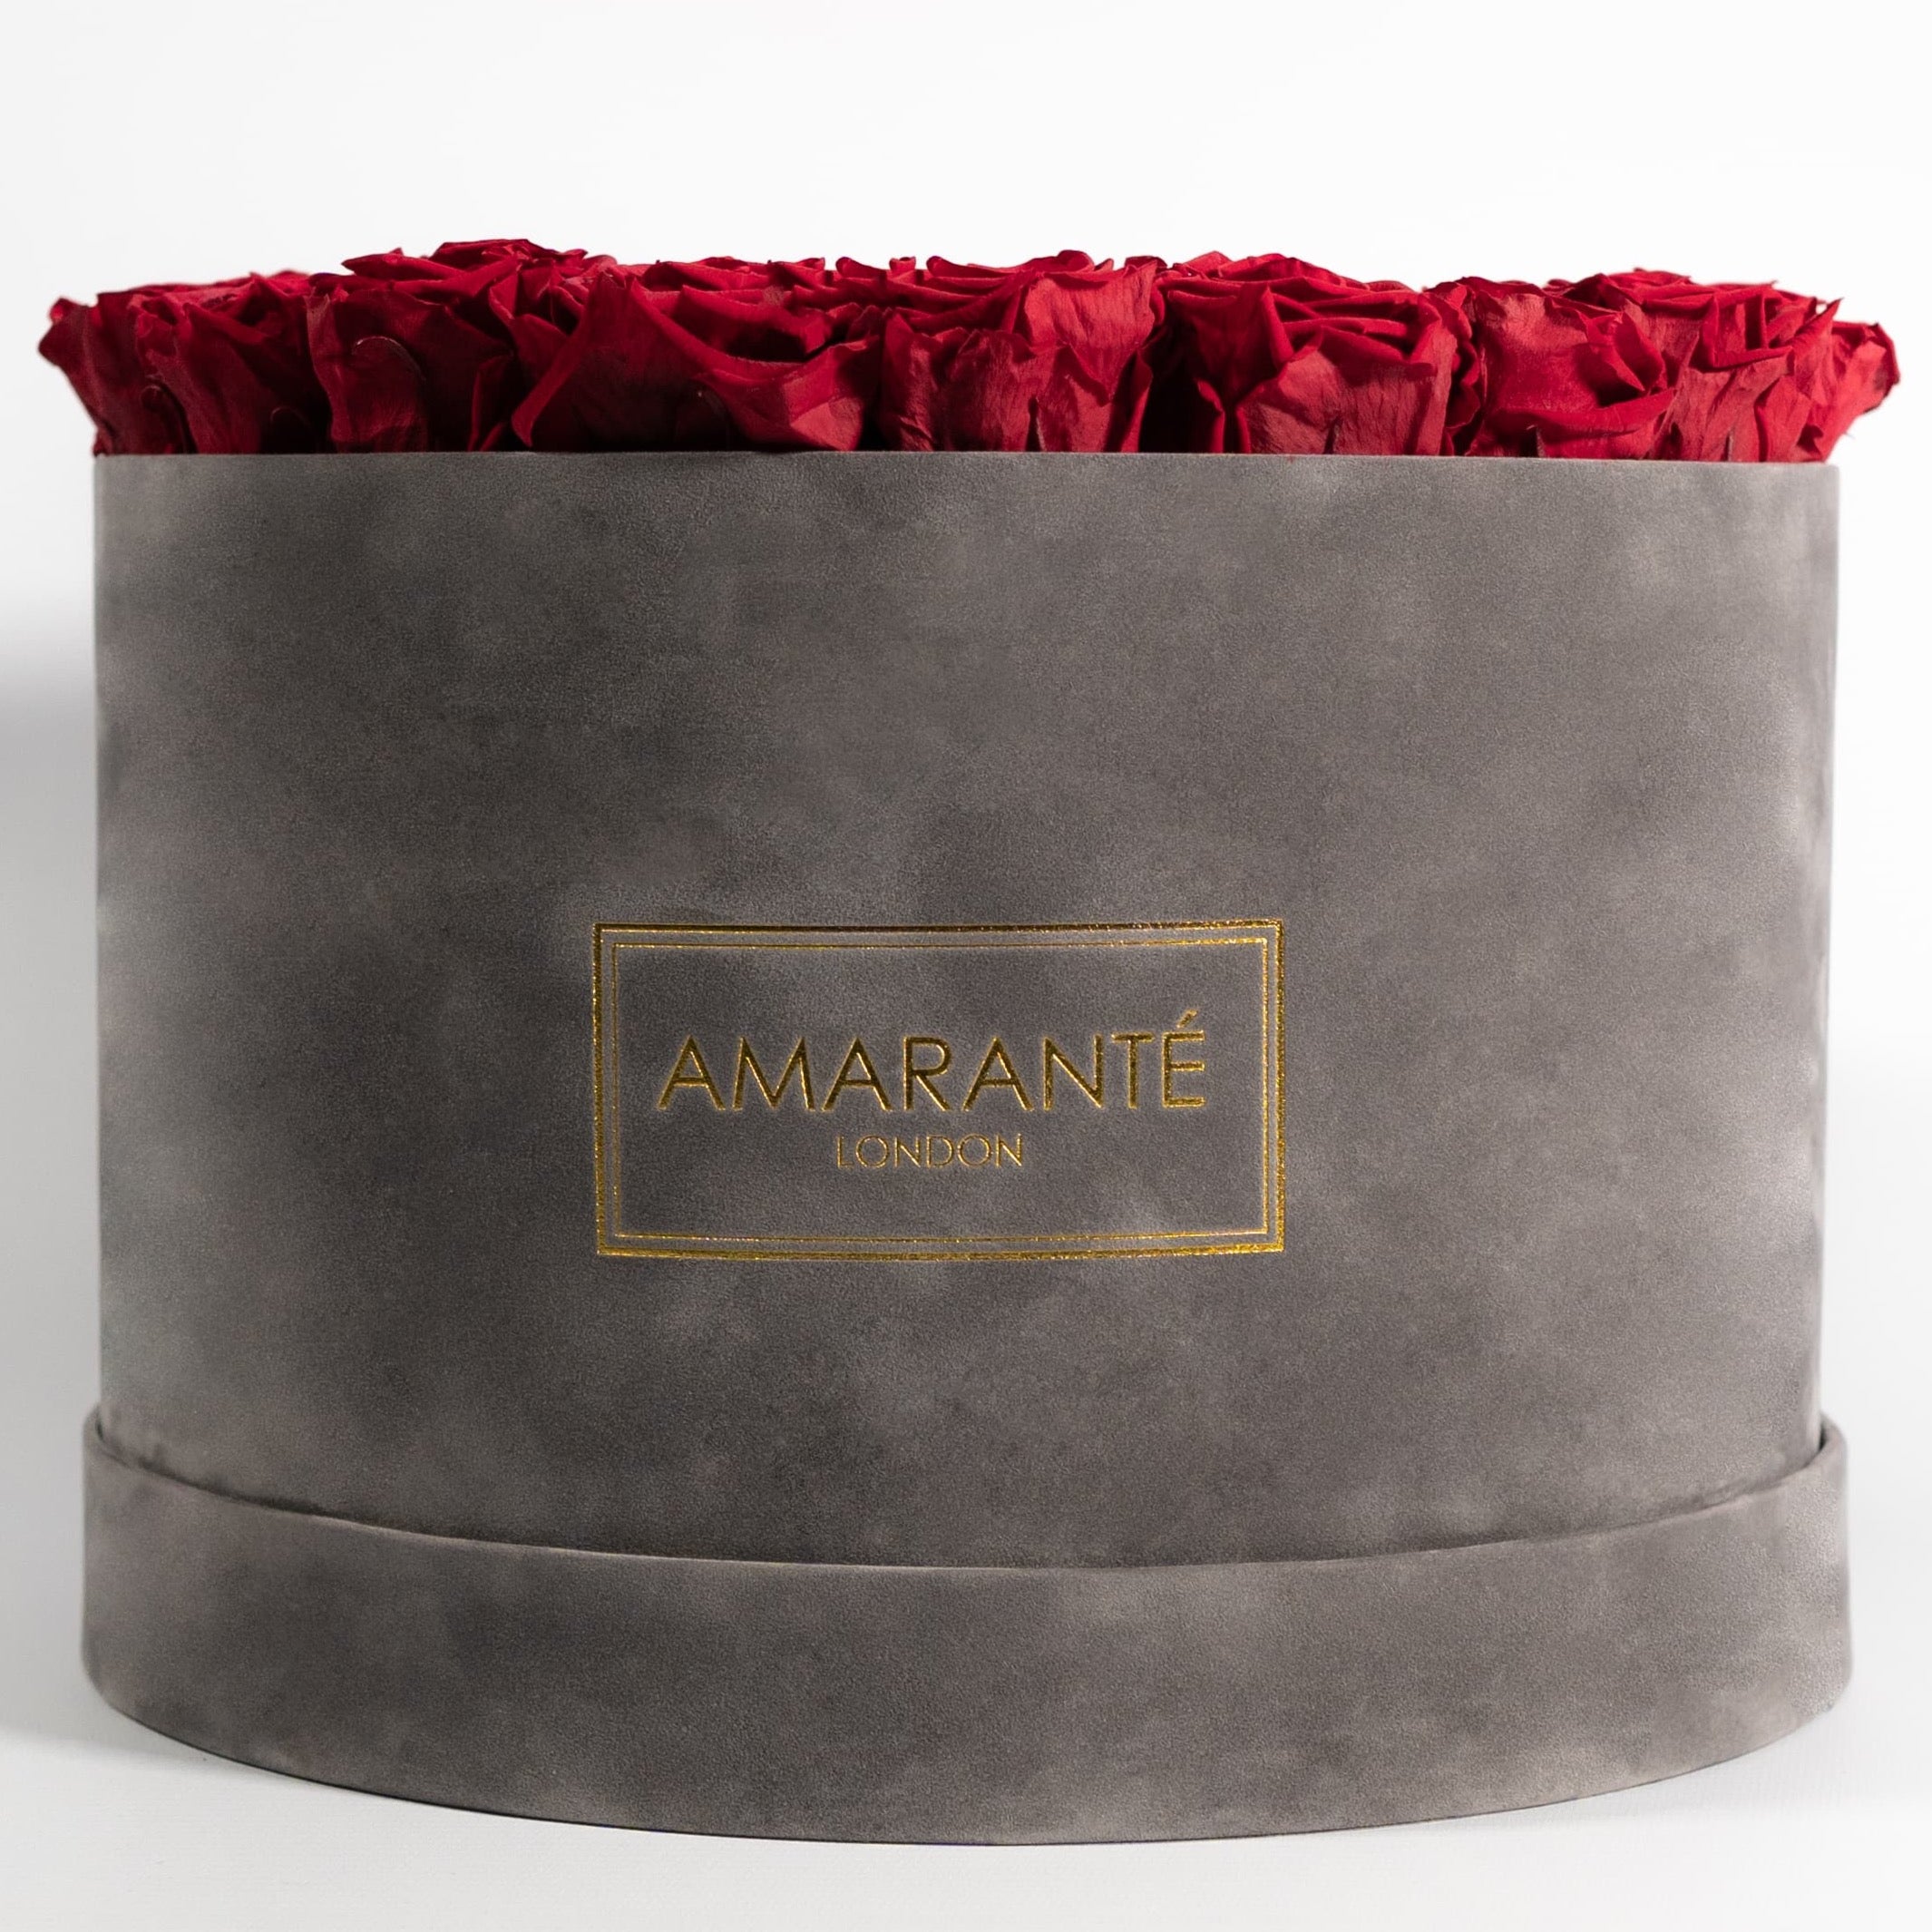 Breath-taking red Roses, an idyllic choice for a wedding centrepiece or anniversary. 